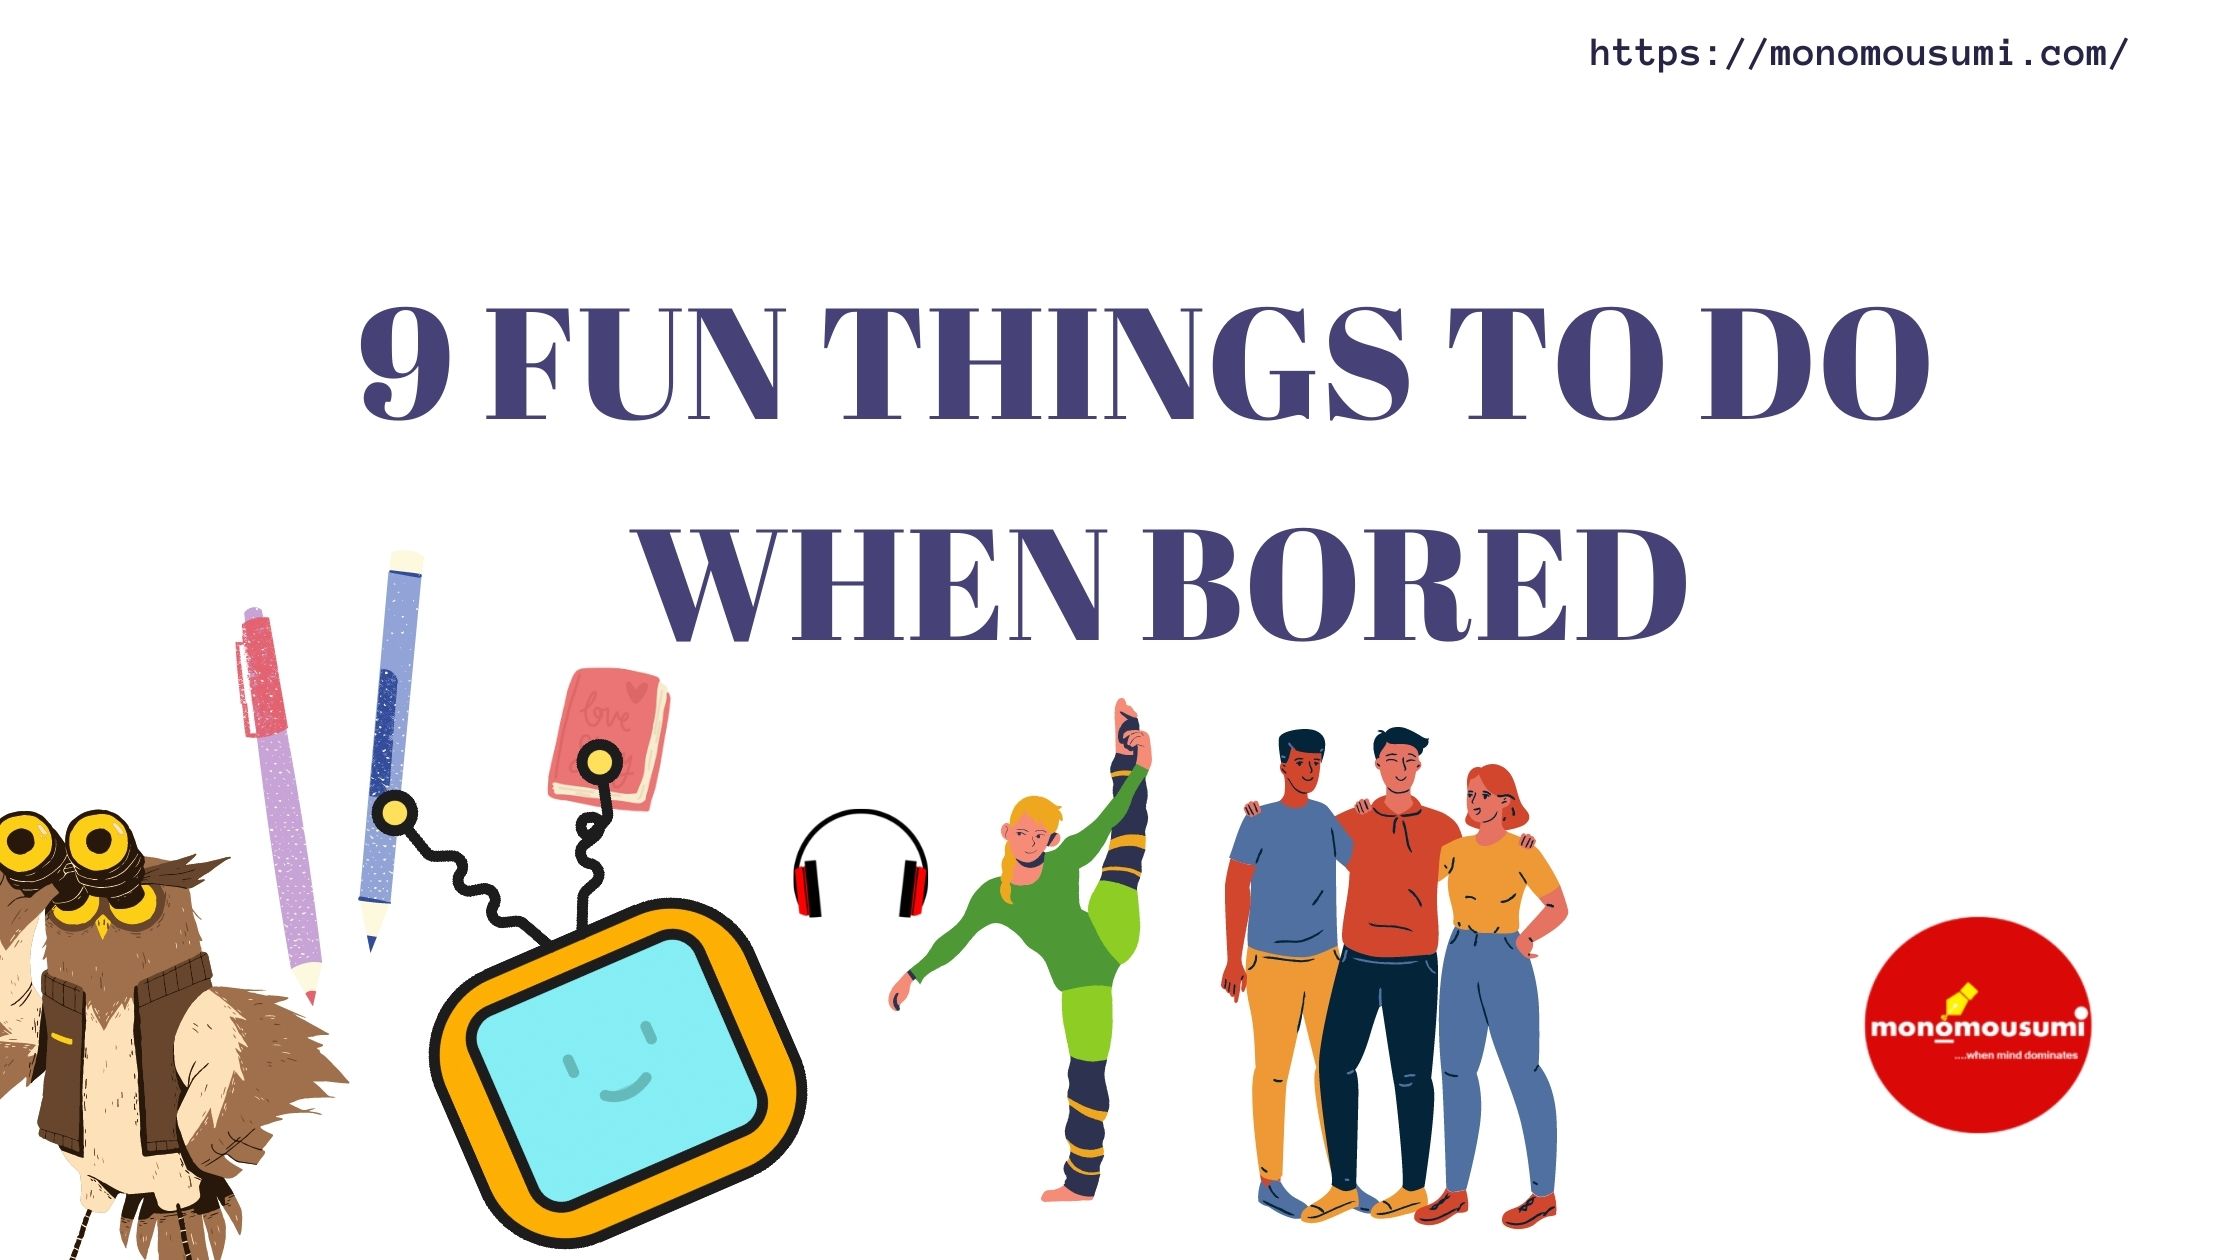 9 FUN THINGS TO DO WHEN BORED